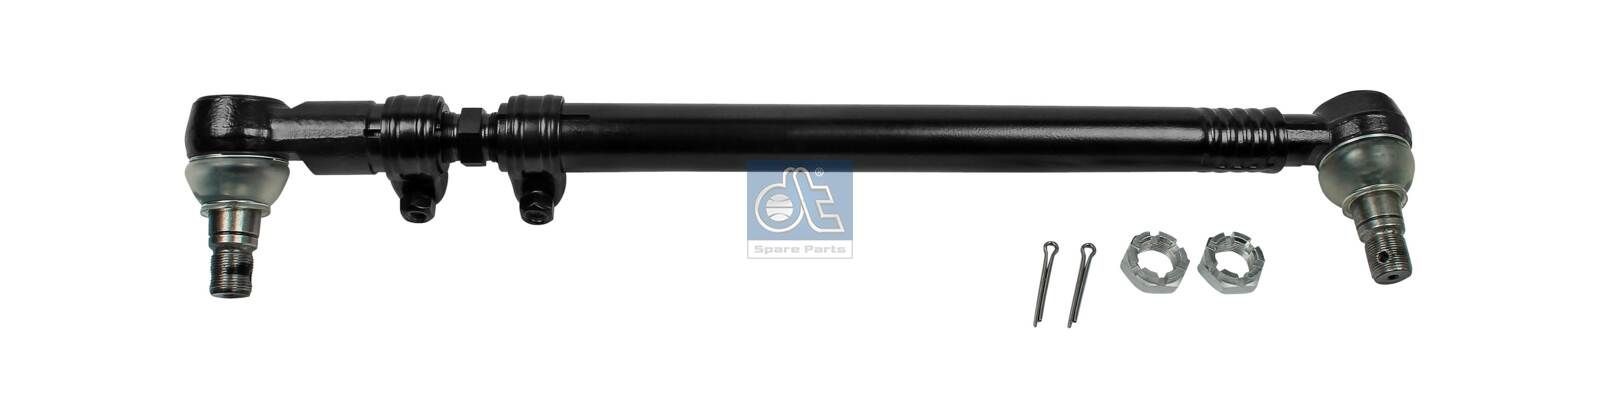 DT Spare Parts 4.65666 Rod Assembly